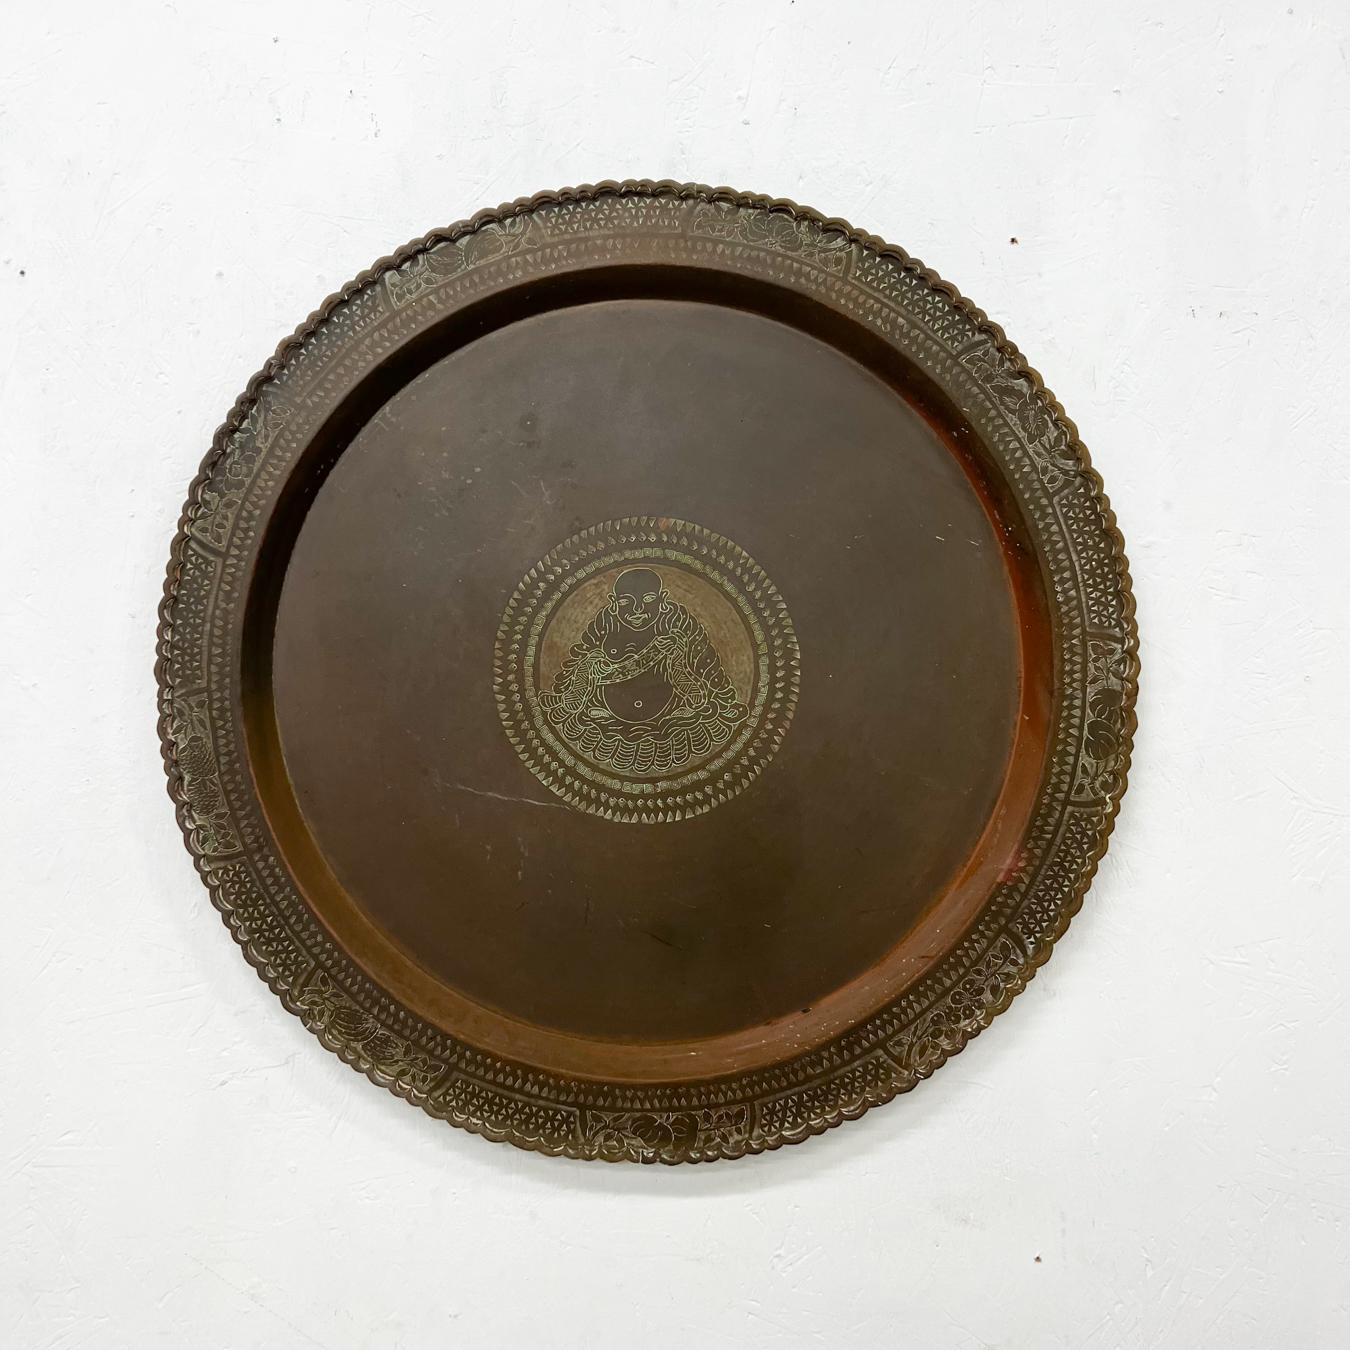 Vintage large brass Buddha tray decorative trim
Wall hanging decor
Stamped Hong Kong
30 diameter x 1.5 d
Original vintage condition unrestored
See images please.

